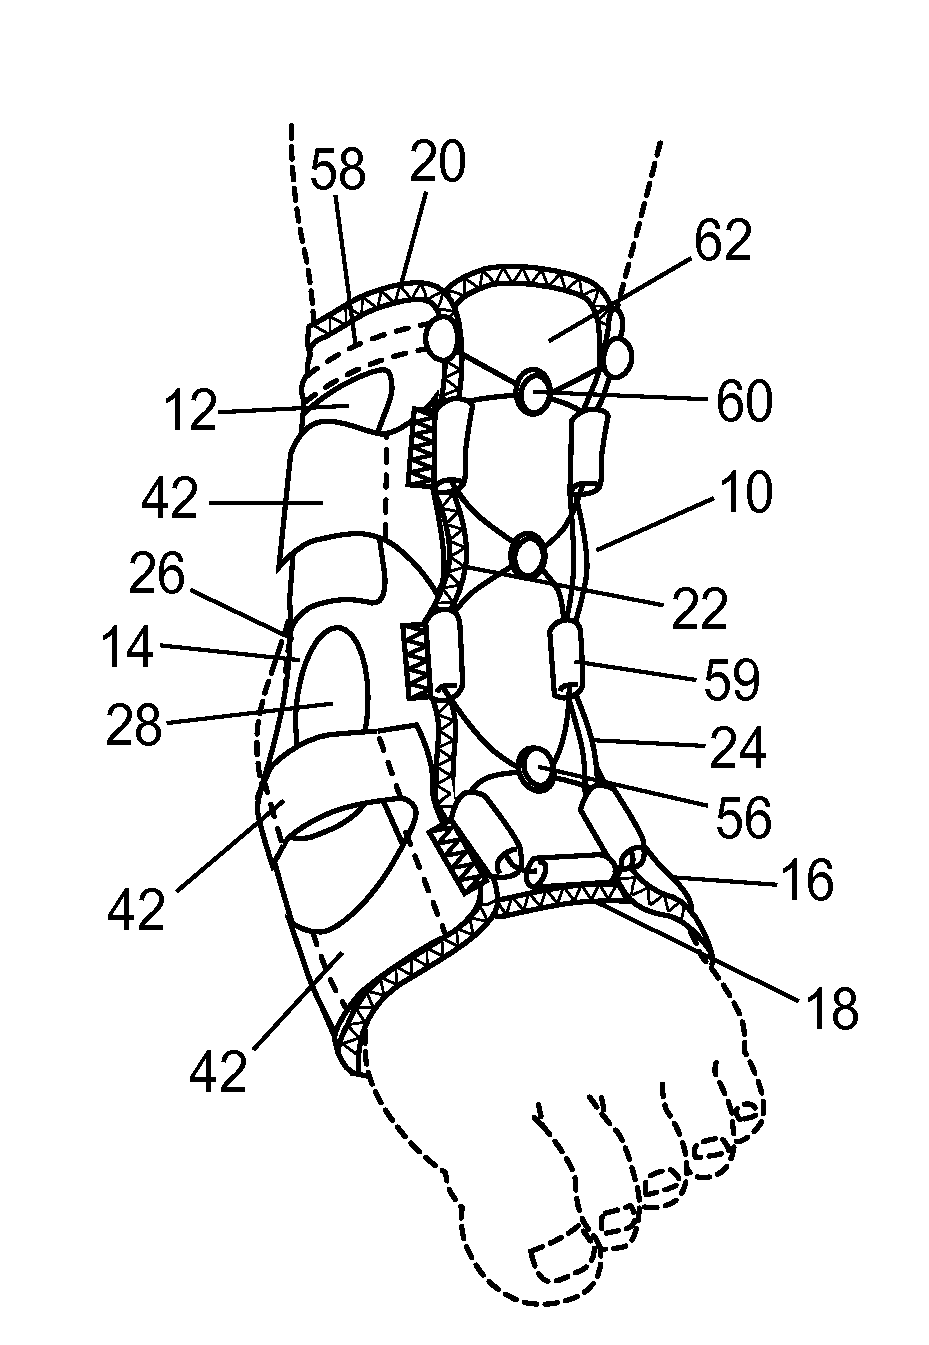 Ankle support with splint and method of using same